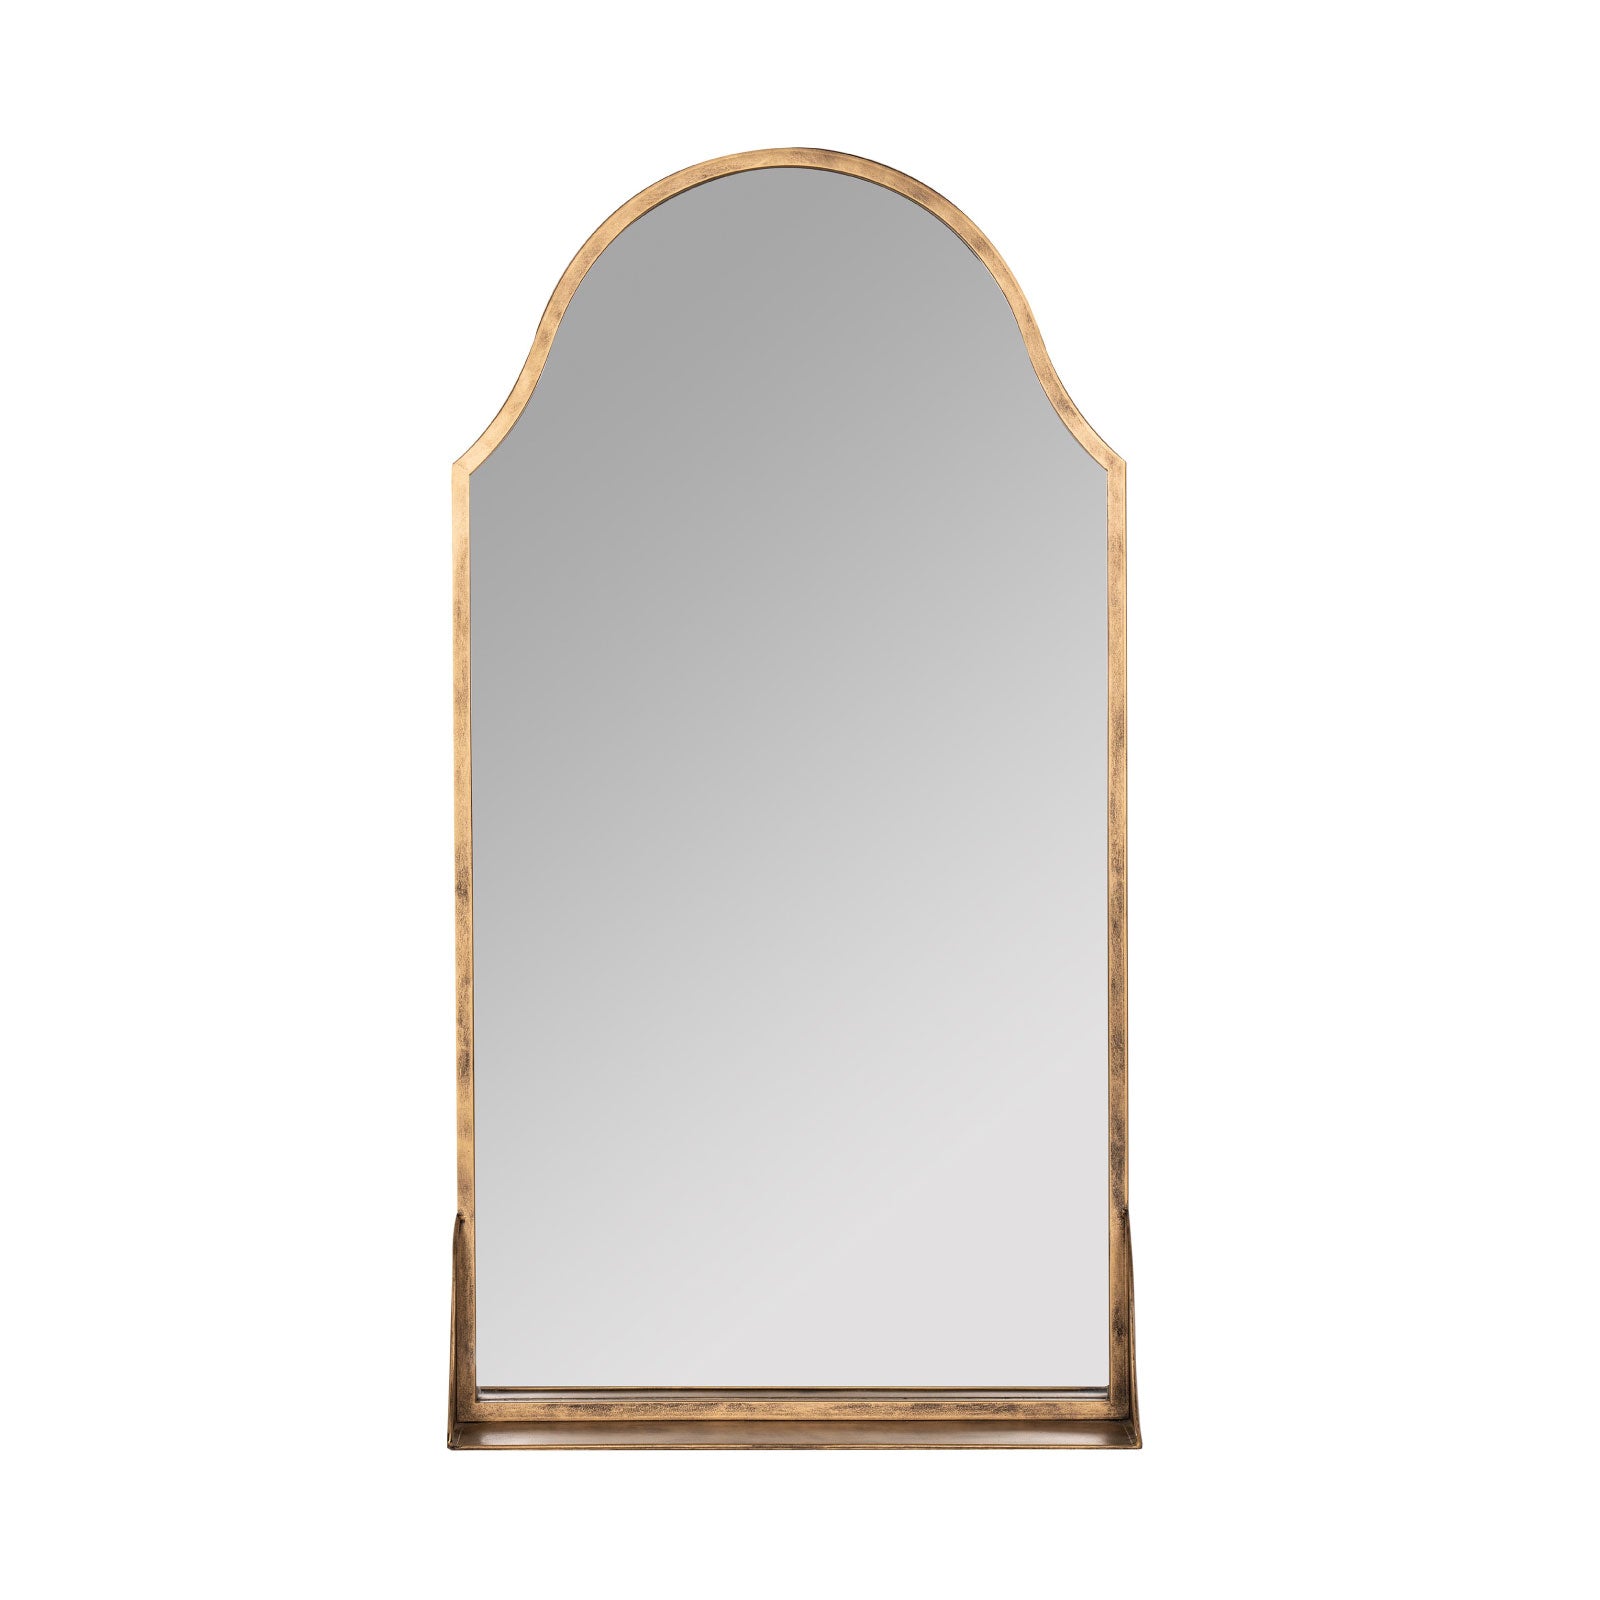 Antique Brass finished mirror with small shelf